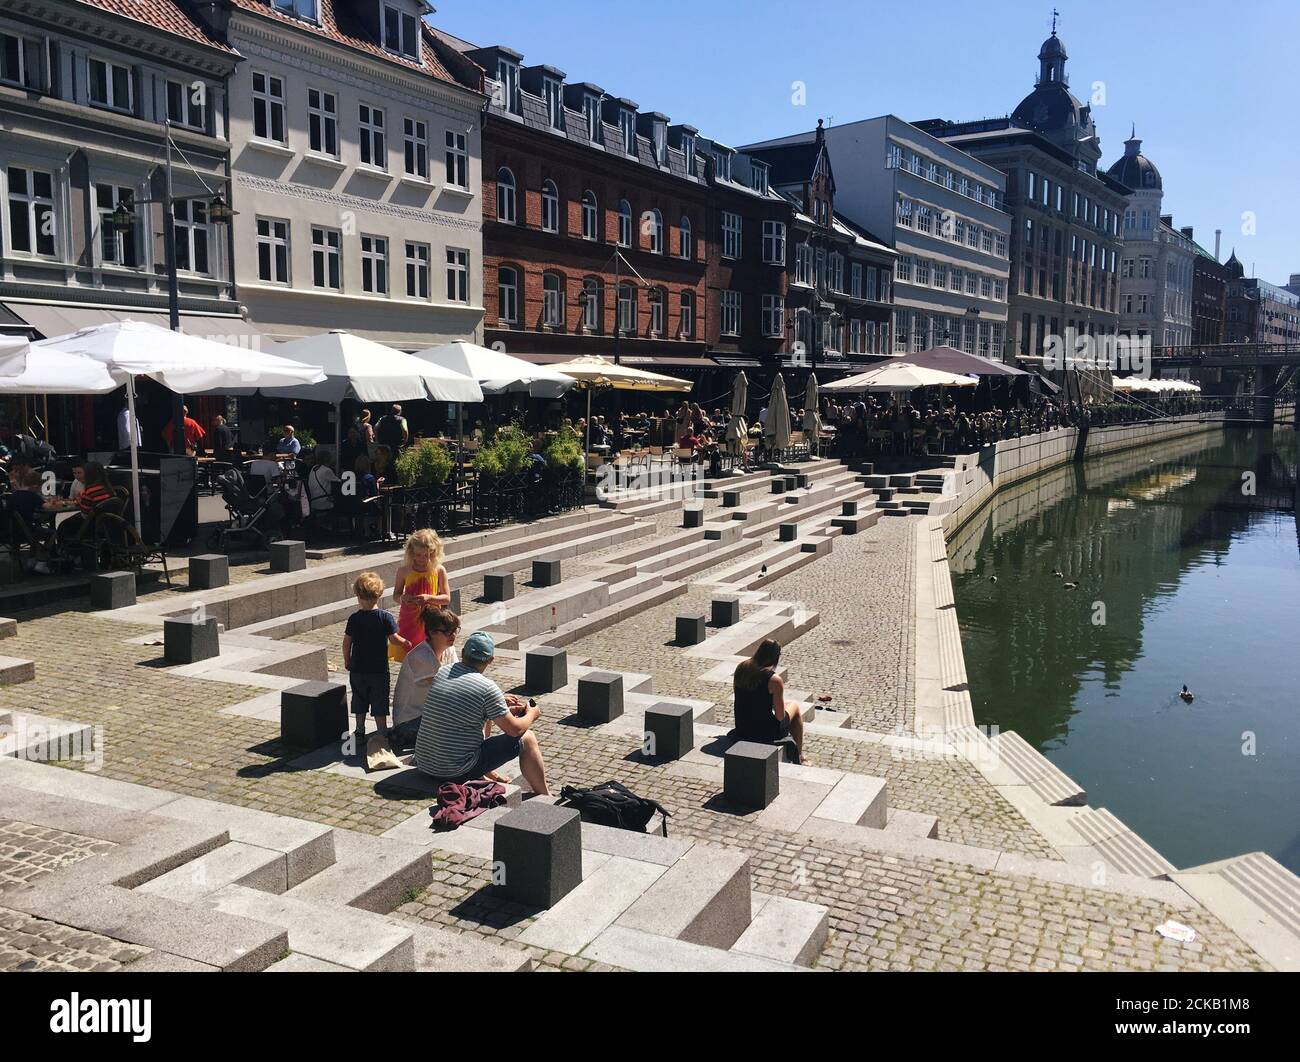 View of Aboulevarden in the centre of the city of Aarhus, Denmark July 10, 2019. Picture taken July 10, 2019. REUTERS/Nina Chestney Stock Photo